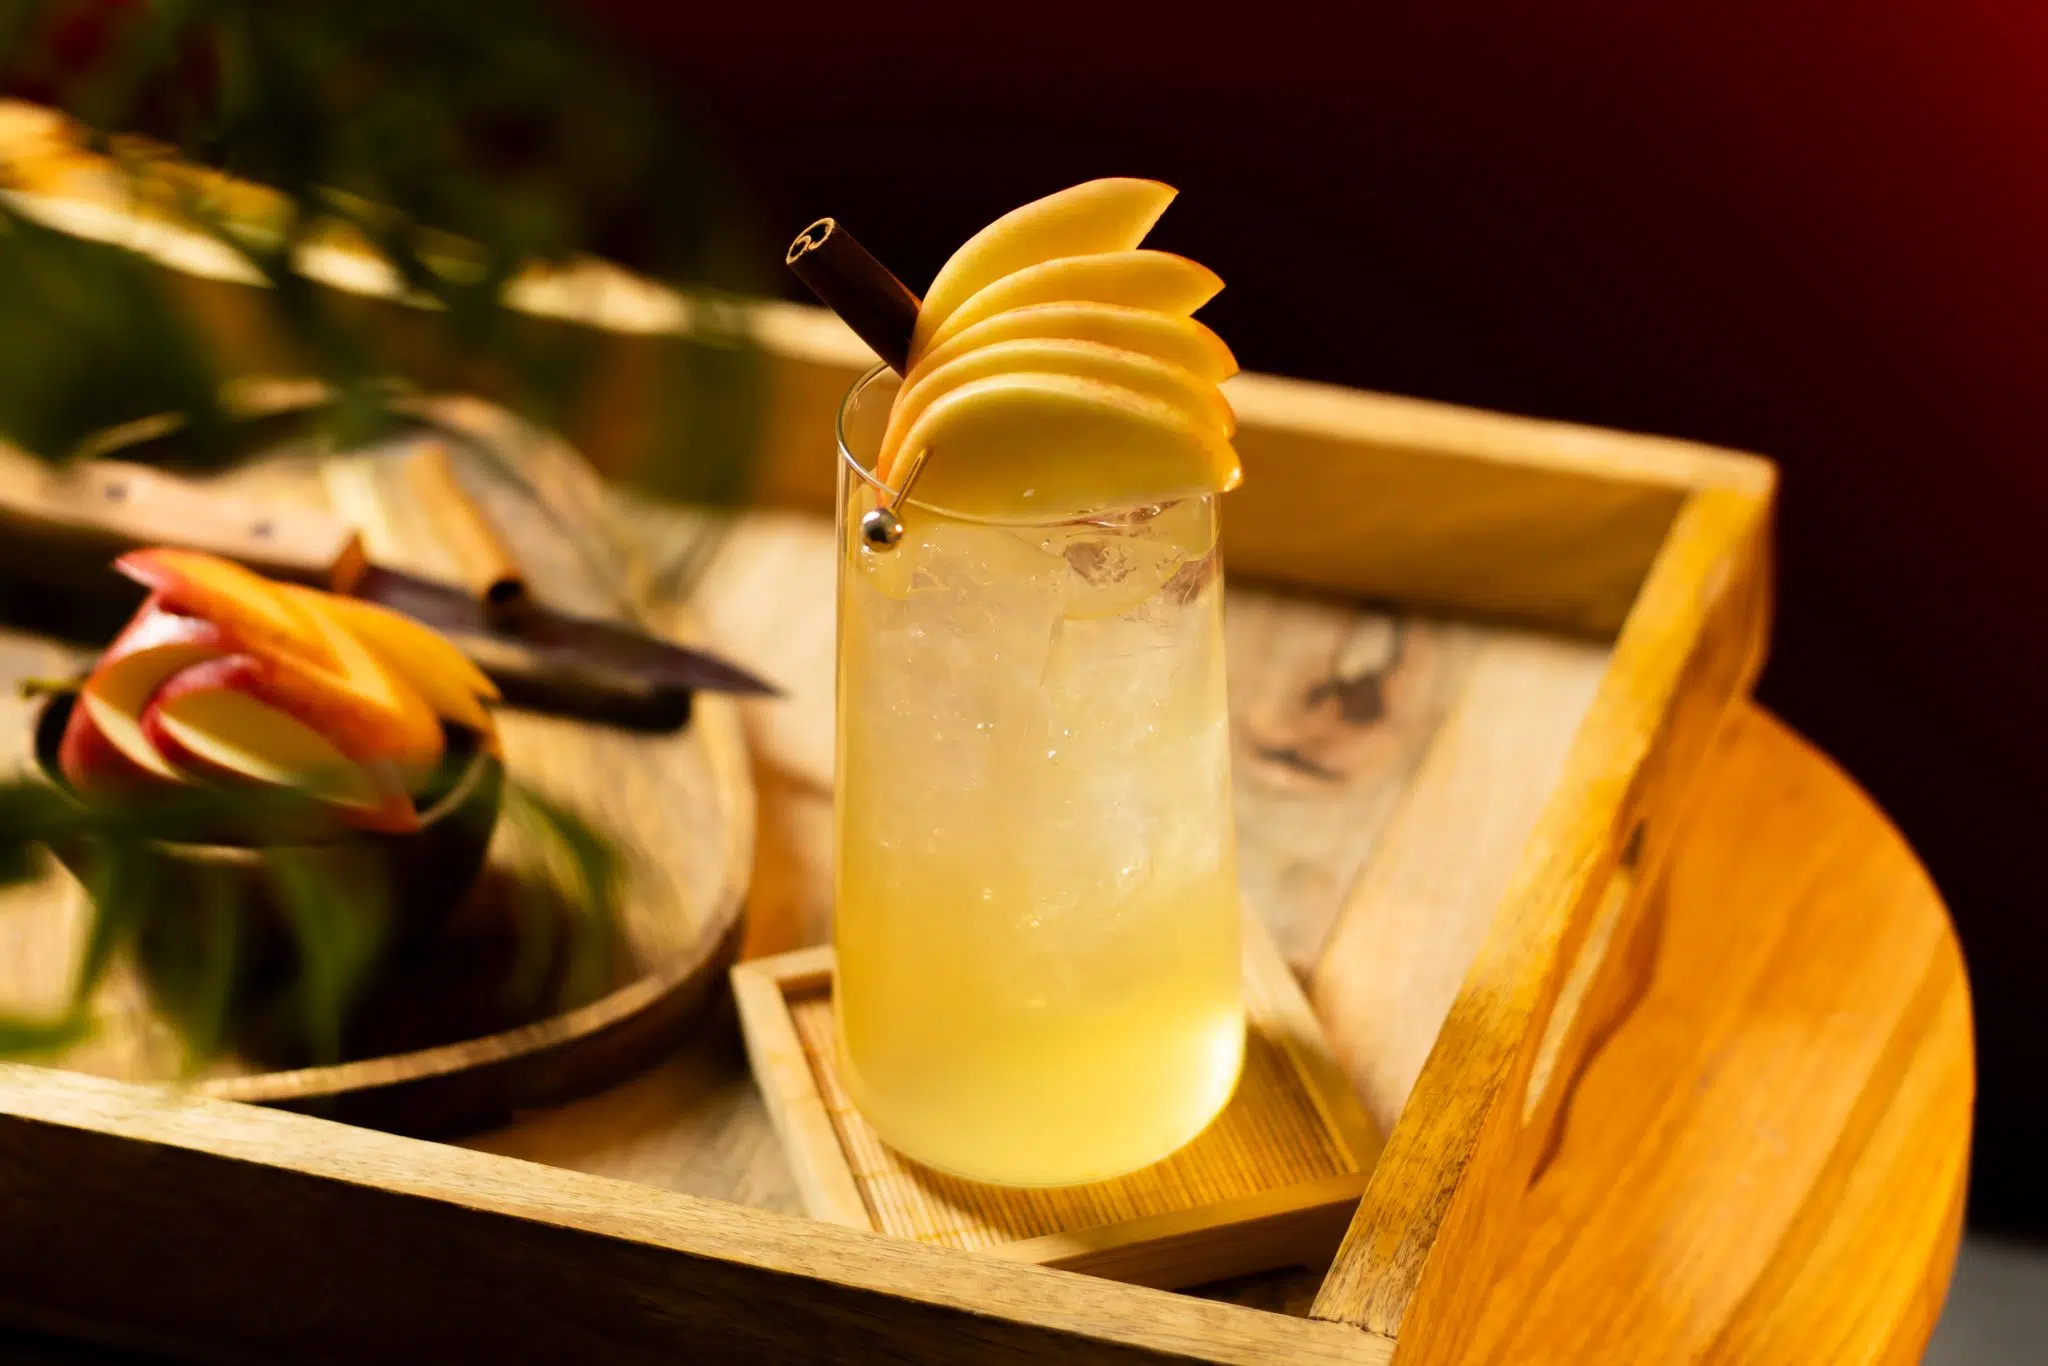 A side shot of a Apple Cider Mule cocktail in a highball glass on a wooden coaster placed on a wooden tray surrounded by apple slices, a wooden board and a knife.